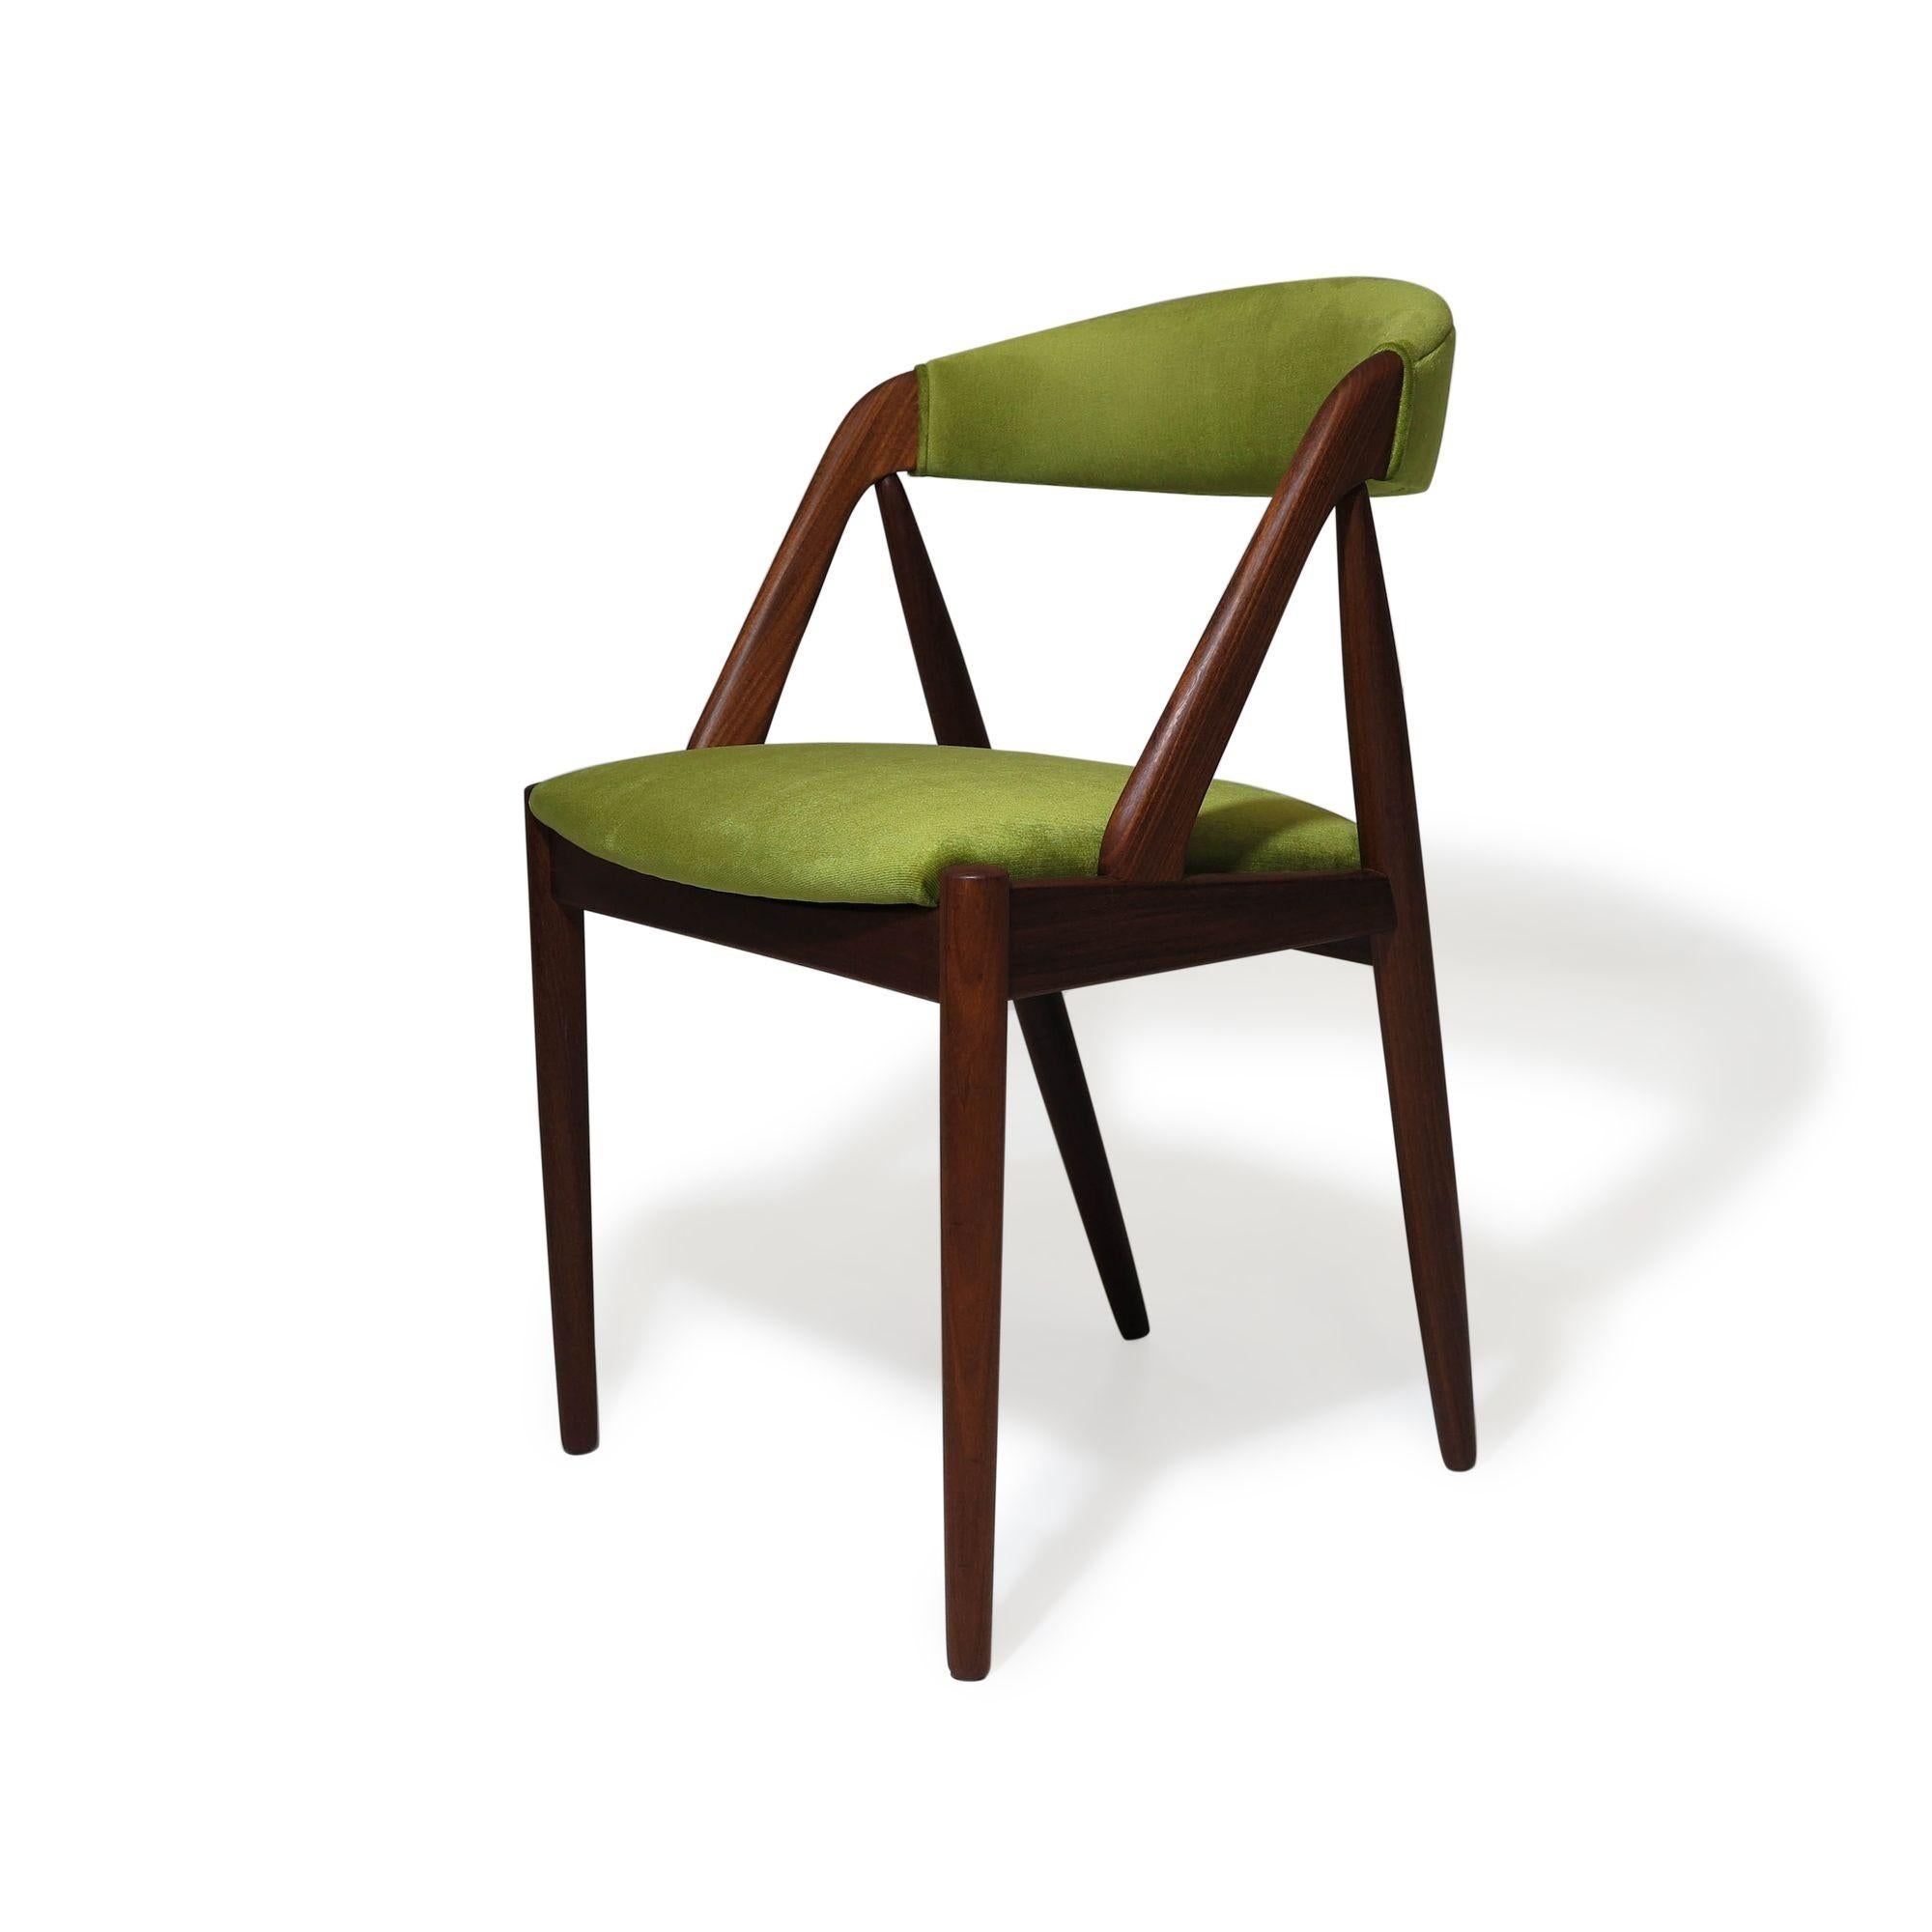 Mid-century Danish dining chairs designed by Kai Kristiansen for Schou Andersen, Model 31. The chairs feature solid walnut frames with comfortable and supportive back rests; newly upholstered in a lime green velvet upholstery, over new foam and new